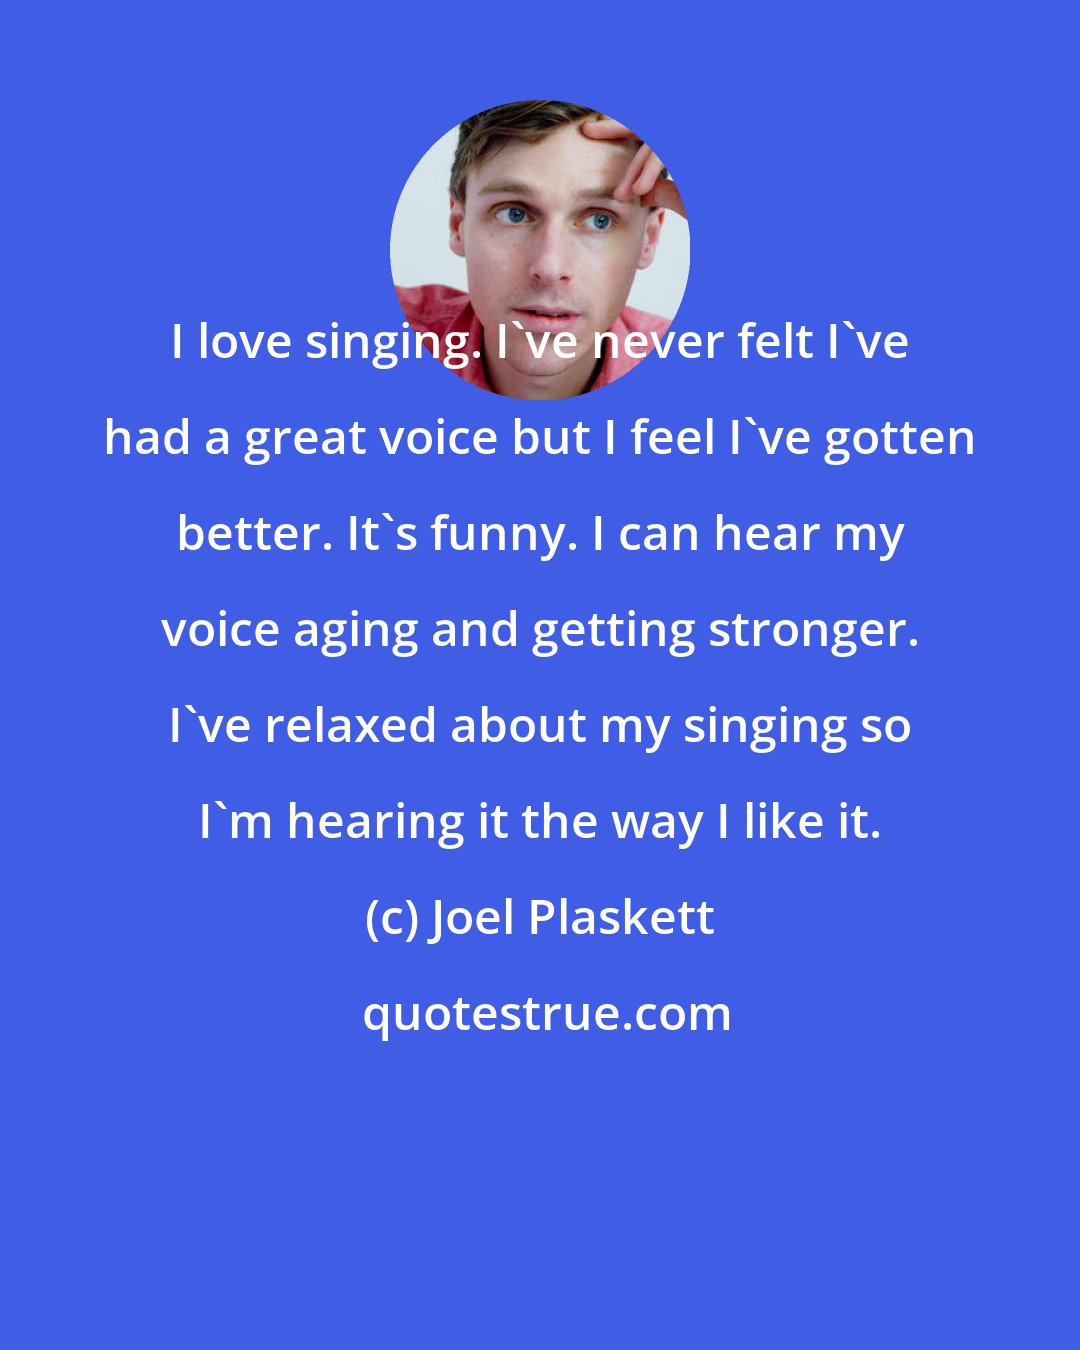 Joel Plaskett: I love singing. I've never felt I've had a great voice but I feel I've gotten better. It's funny. I can hear my voice aging and getting stronger. I've relaxed about my singing so I'm hearing it the way I like it.